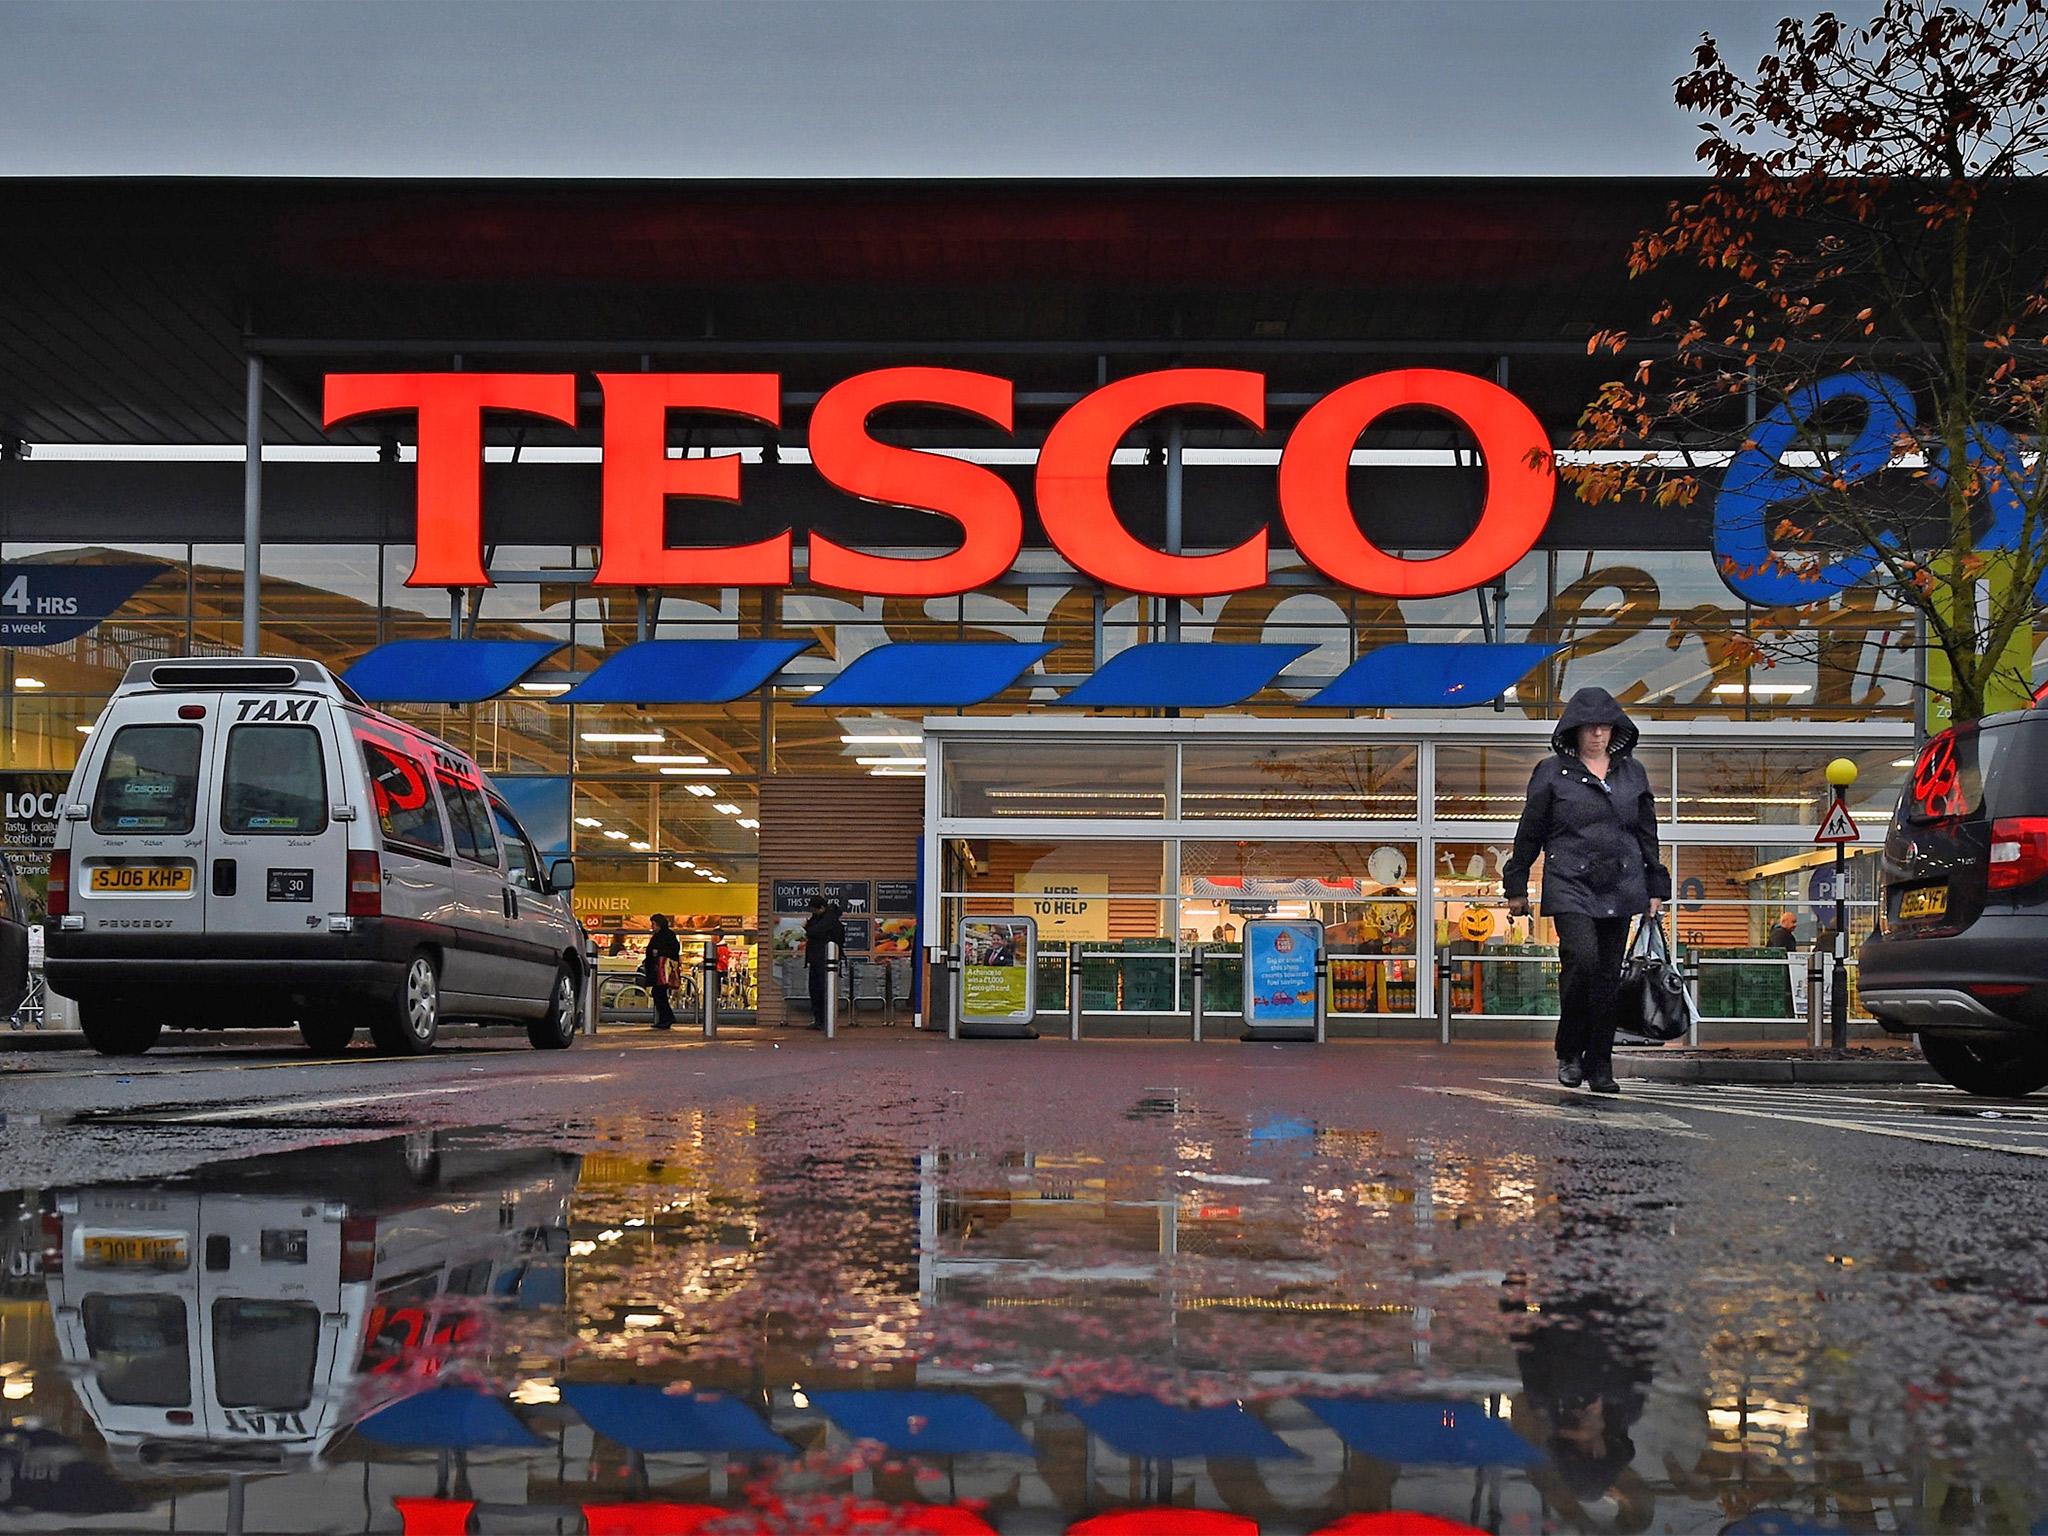 Tesco's former bosses are under investigation after the company overstated its profits by £263 million in 2014